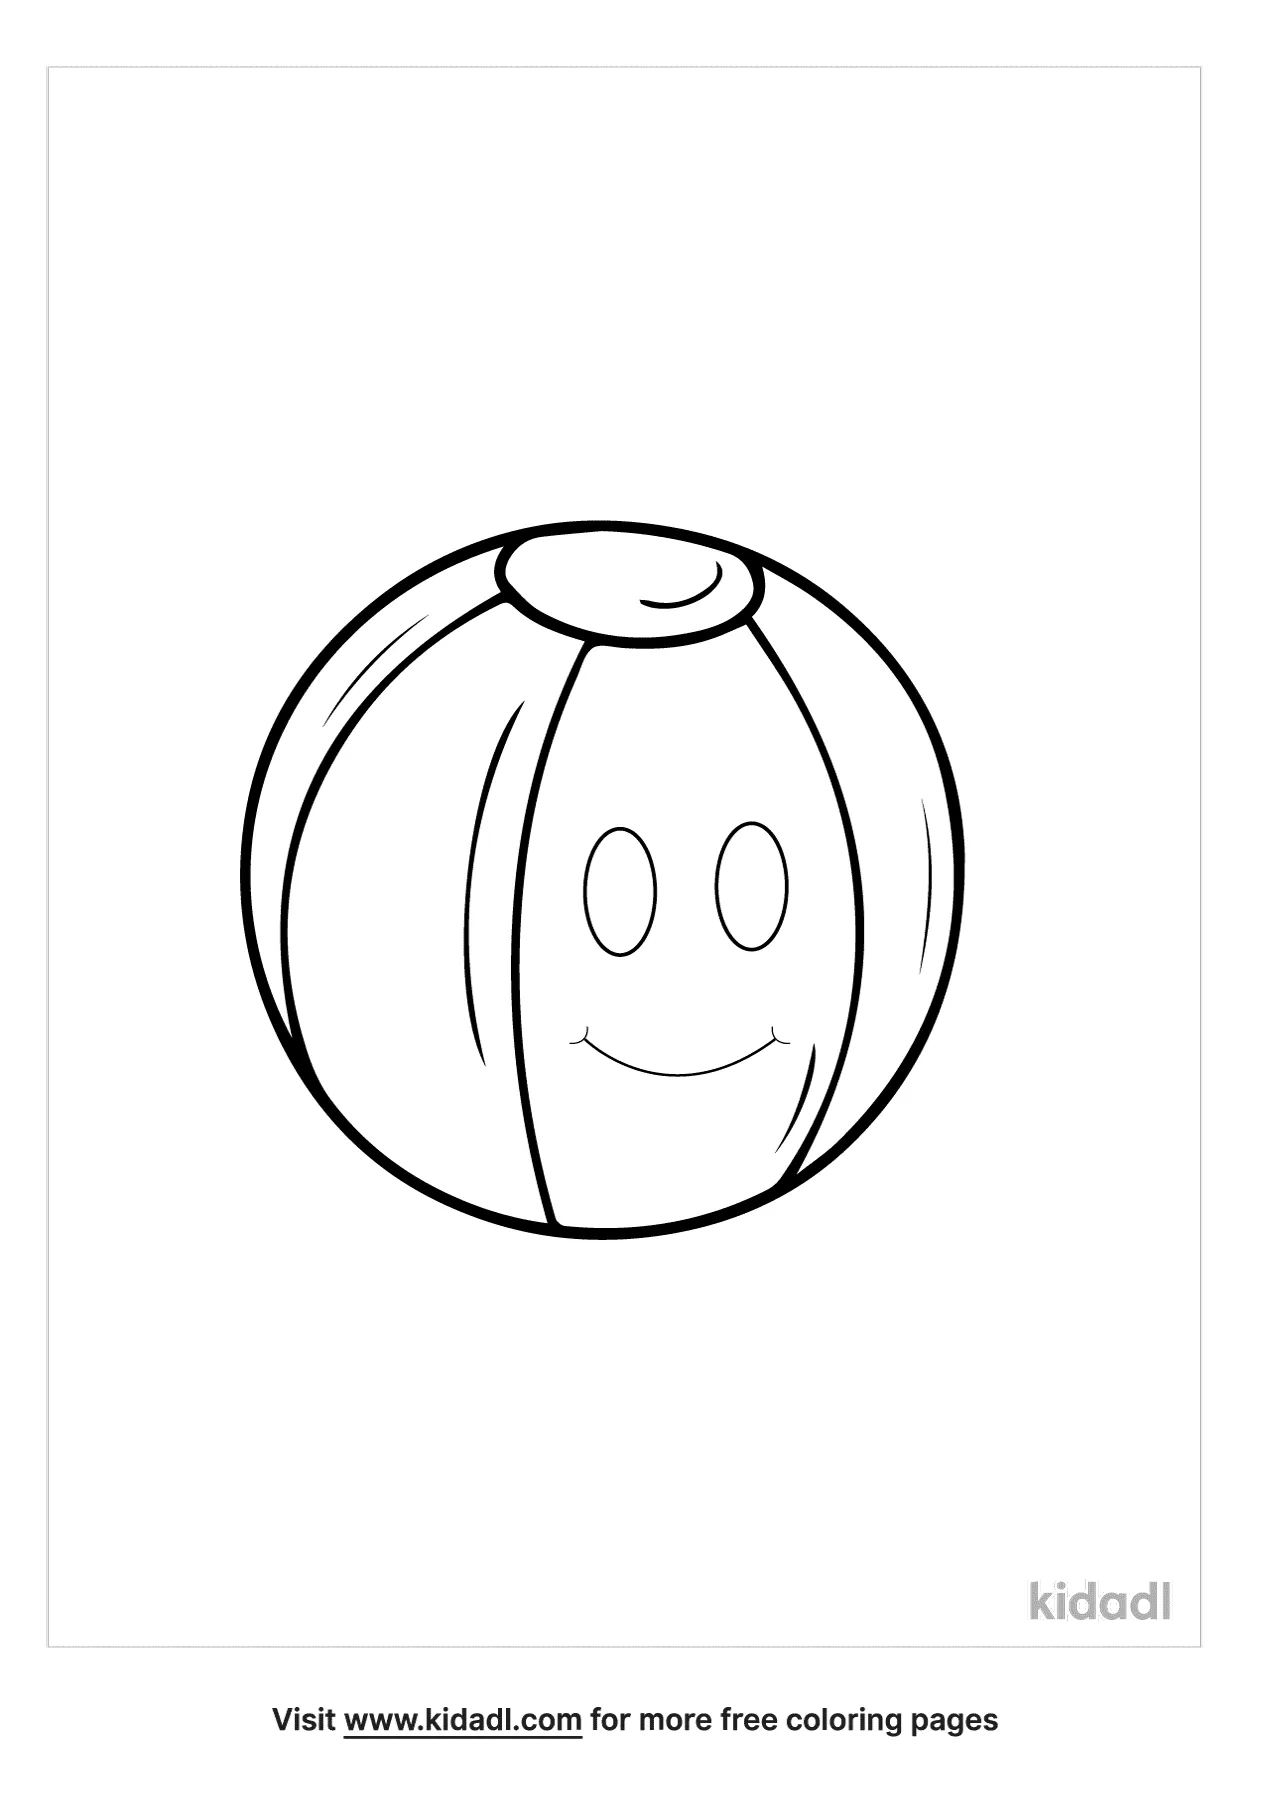 Cute Beach Ball Coloring Page